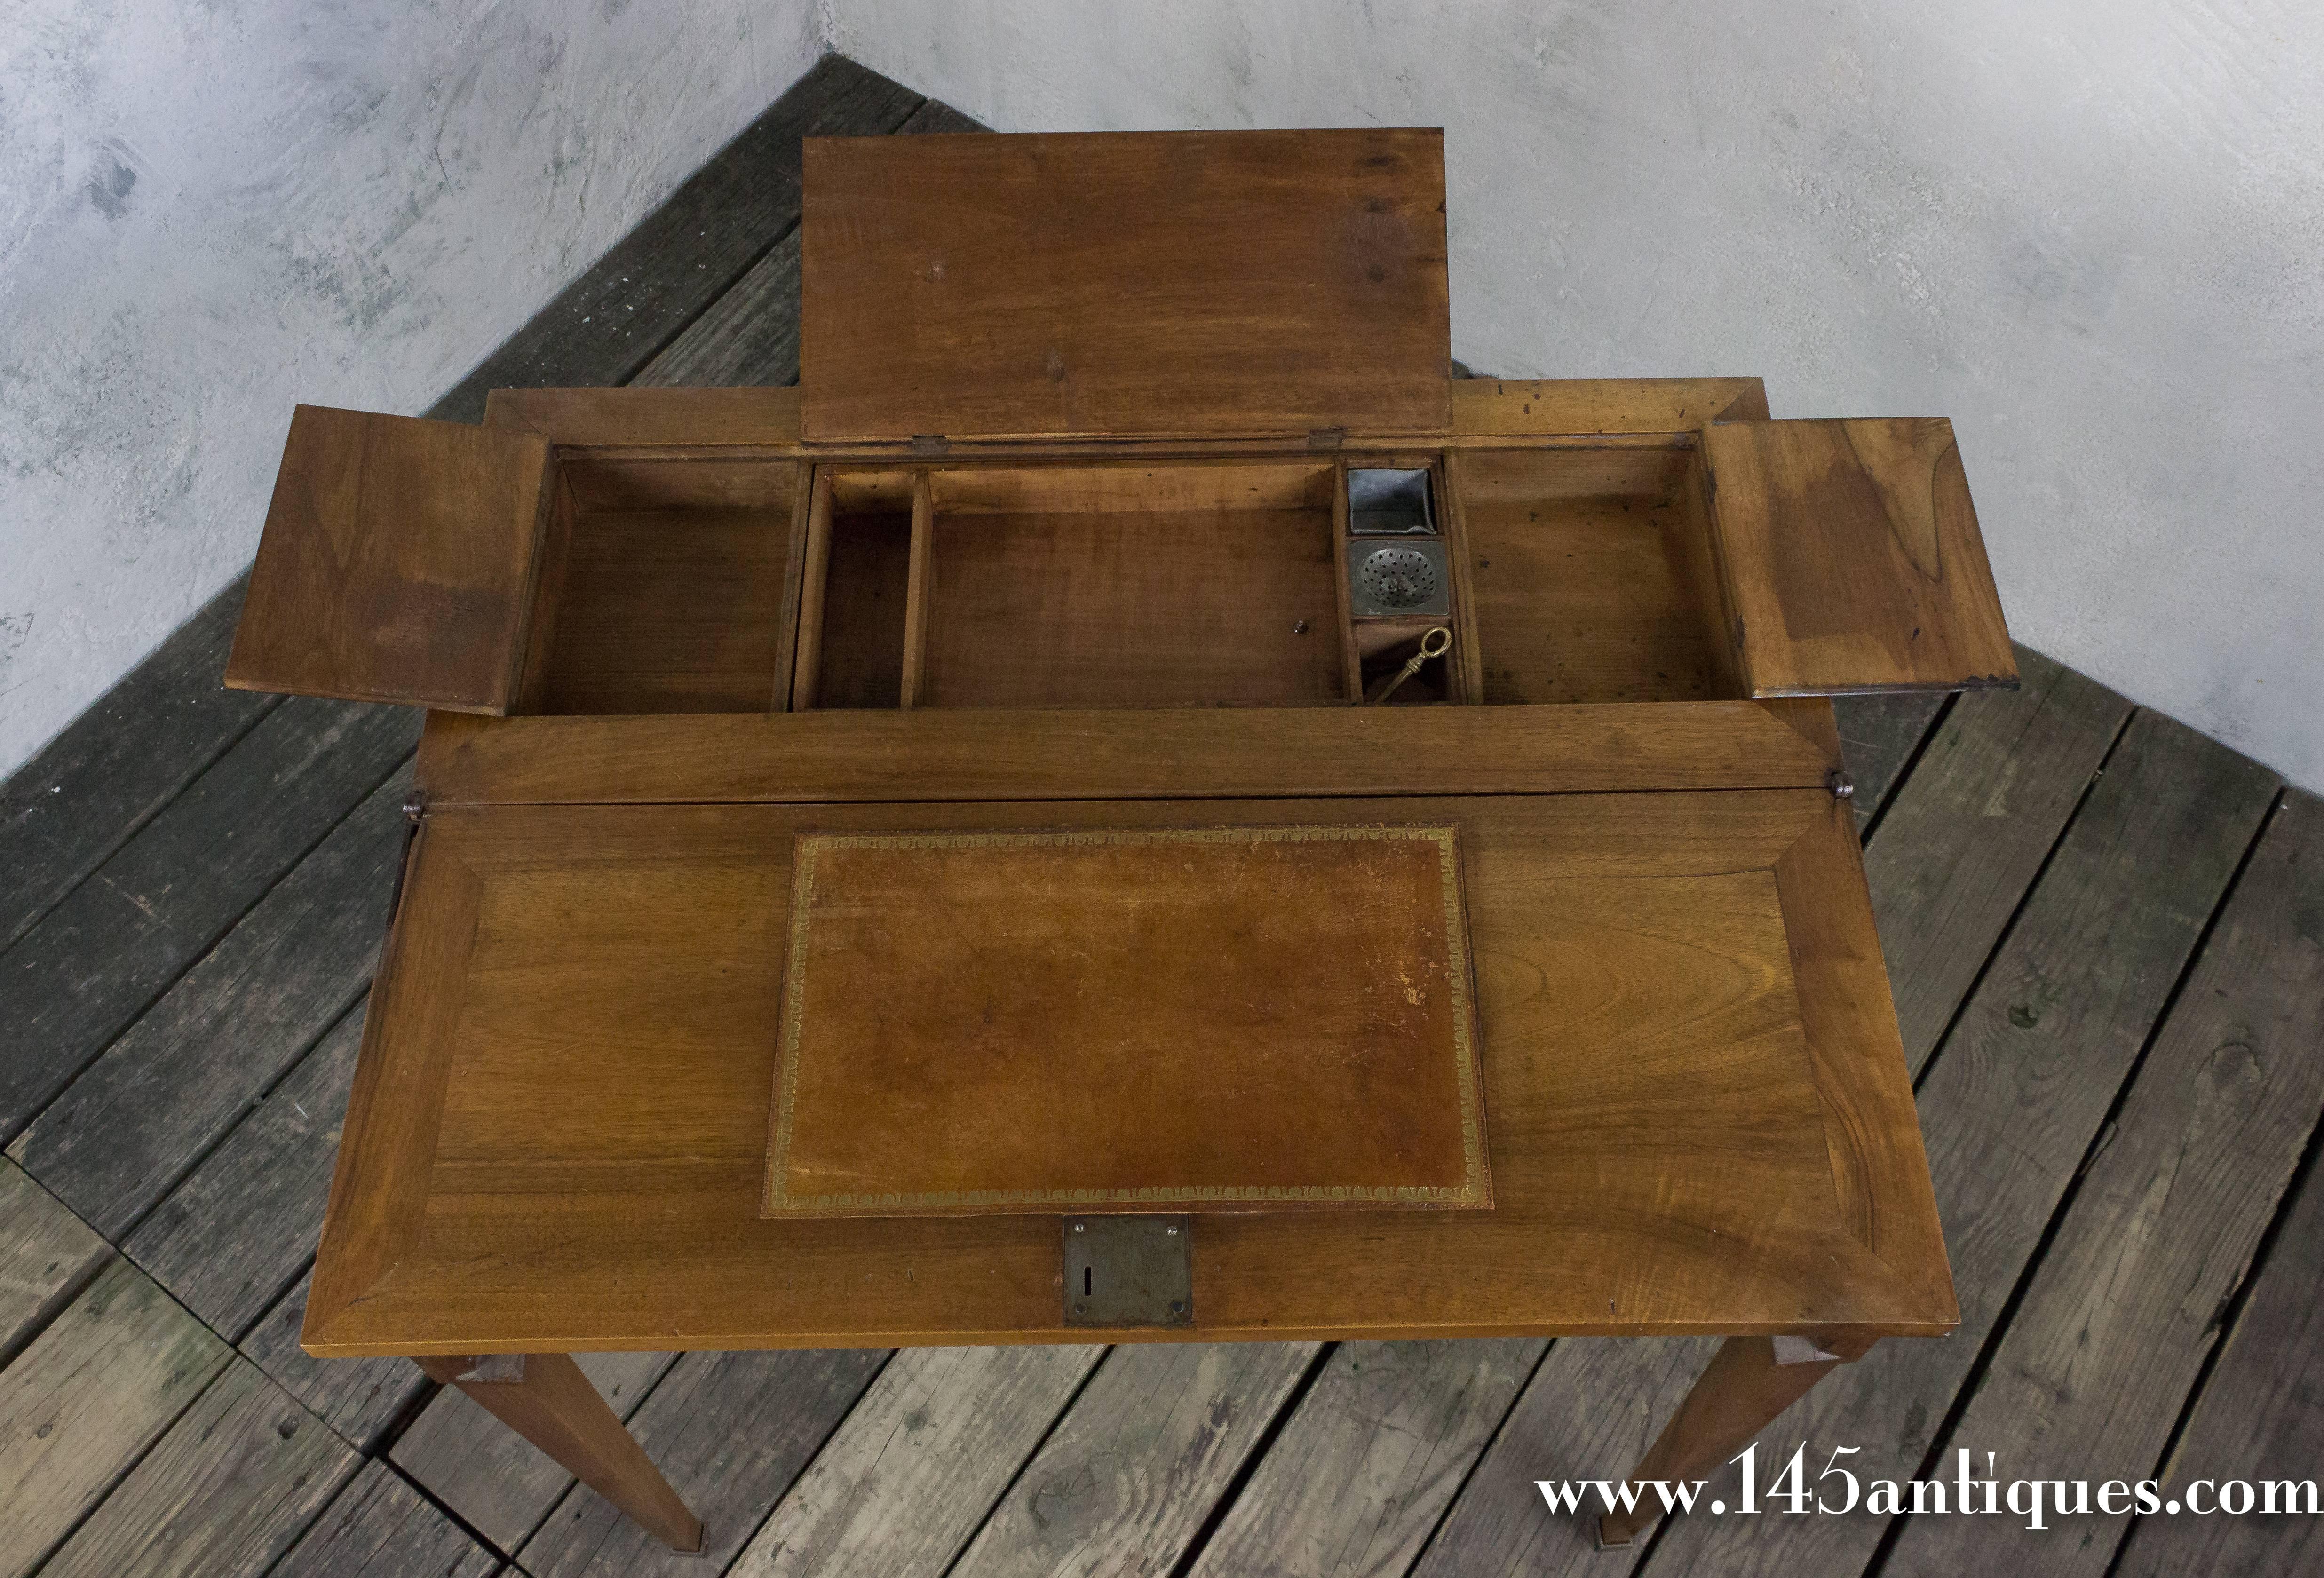 Compact French writing desk with drawers for paper and pens and hidden drawers on the side. Opens to desk 24